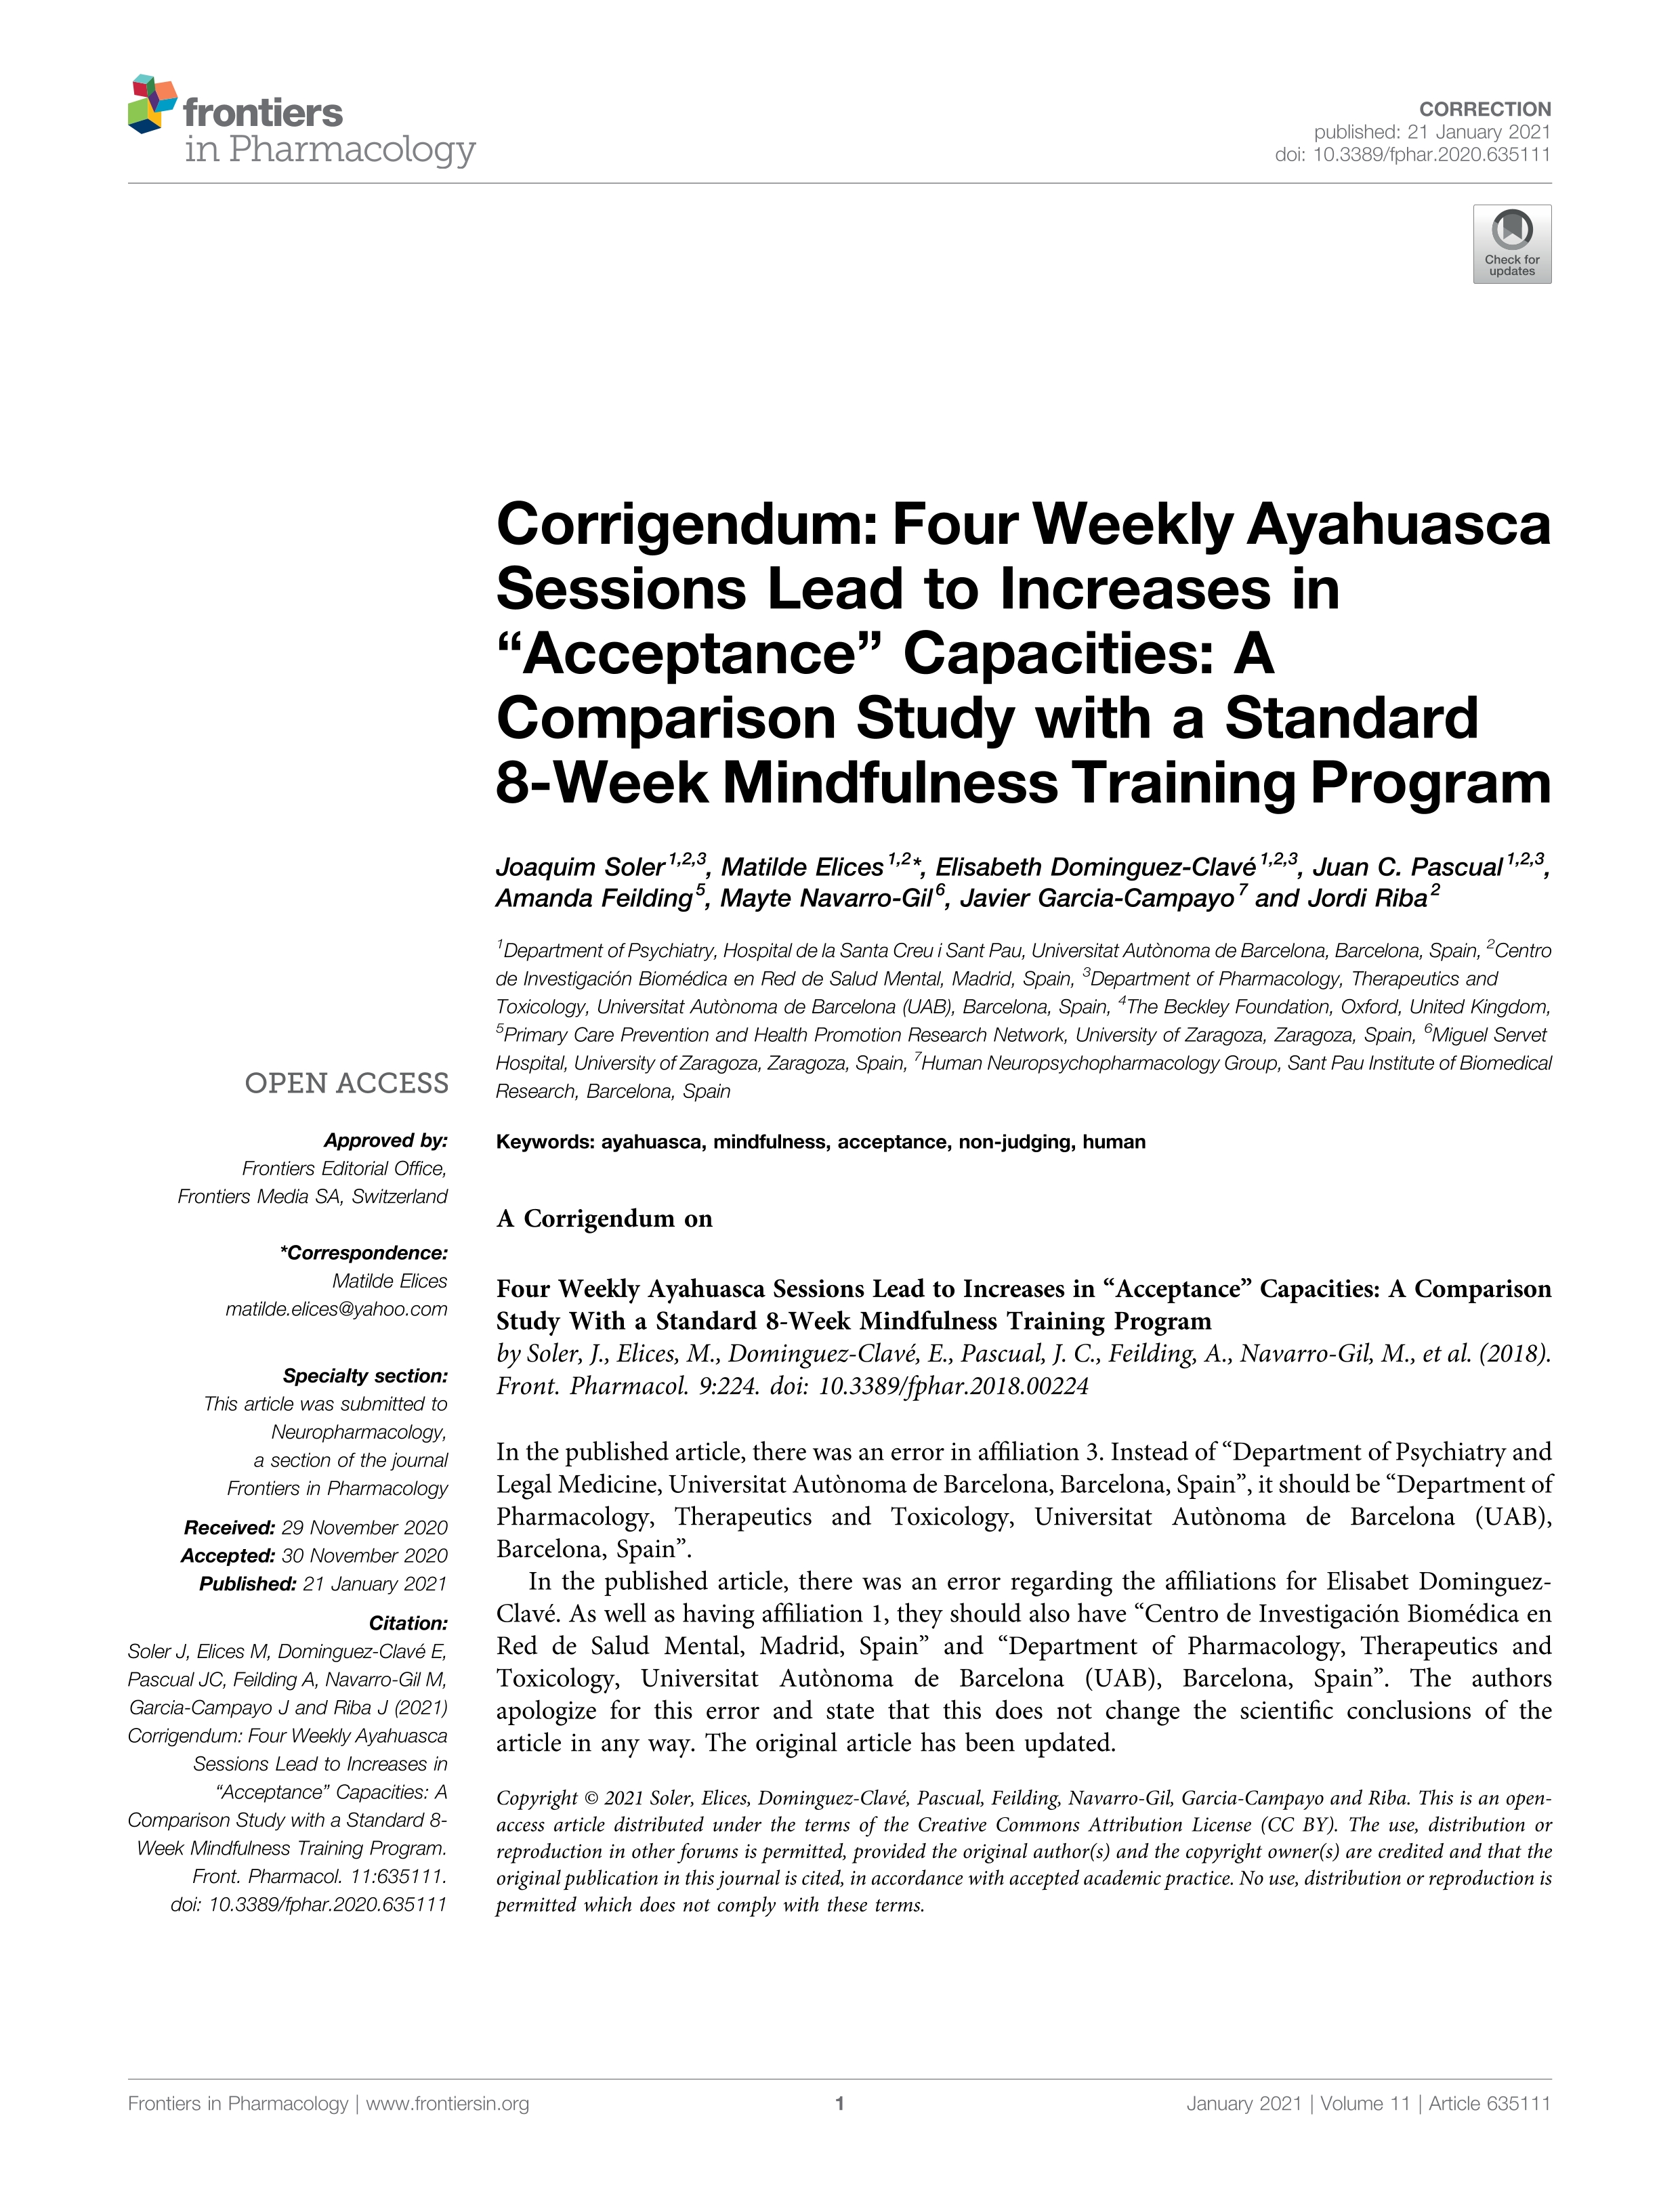 Corrigendum: Four Weekly Ayahuasca Sessions Lead to Increases in “Acceptance” Capacities: A Comparison Study with a Standard 8-Week Mindfulness Training Program (Frontiers in Pharmacology, (2018), 9, (224), 10.3389/fphar.2018.00224)